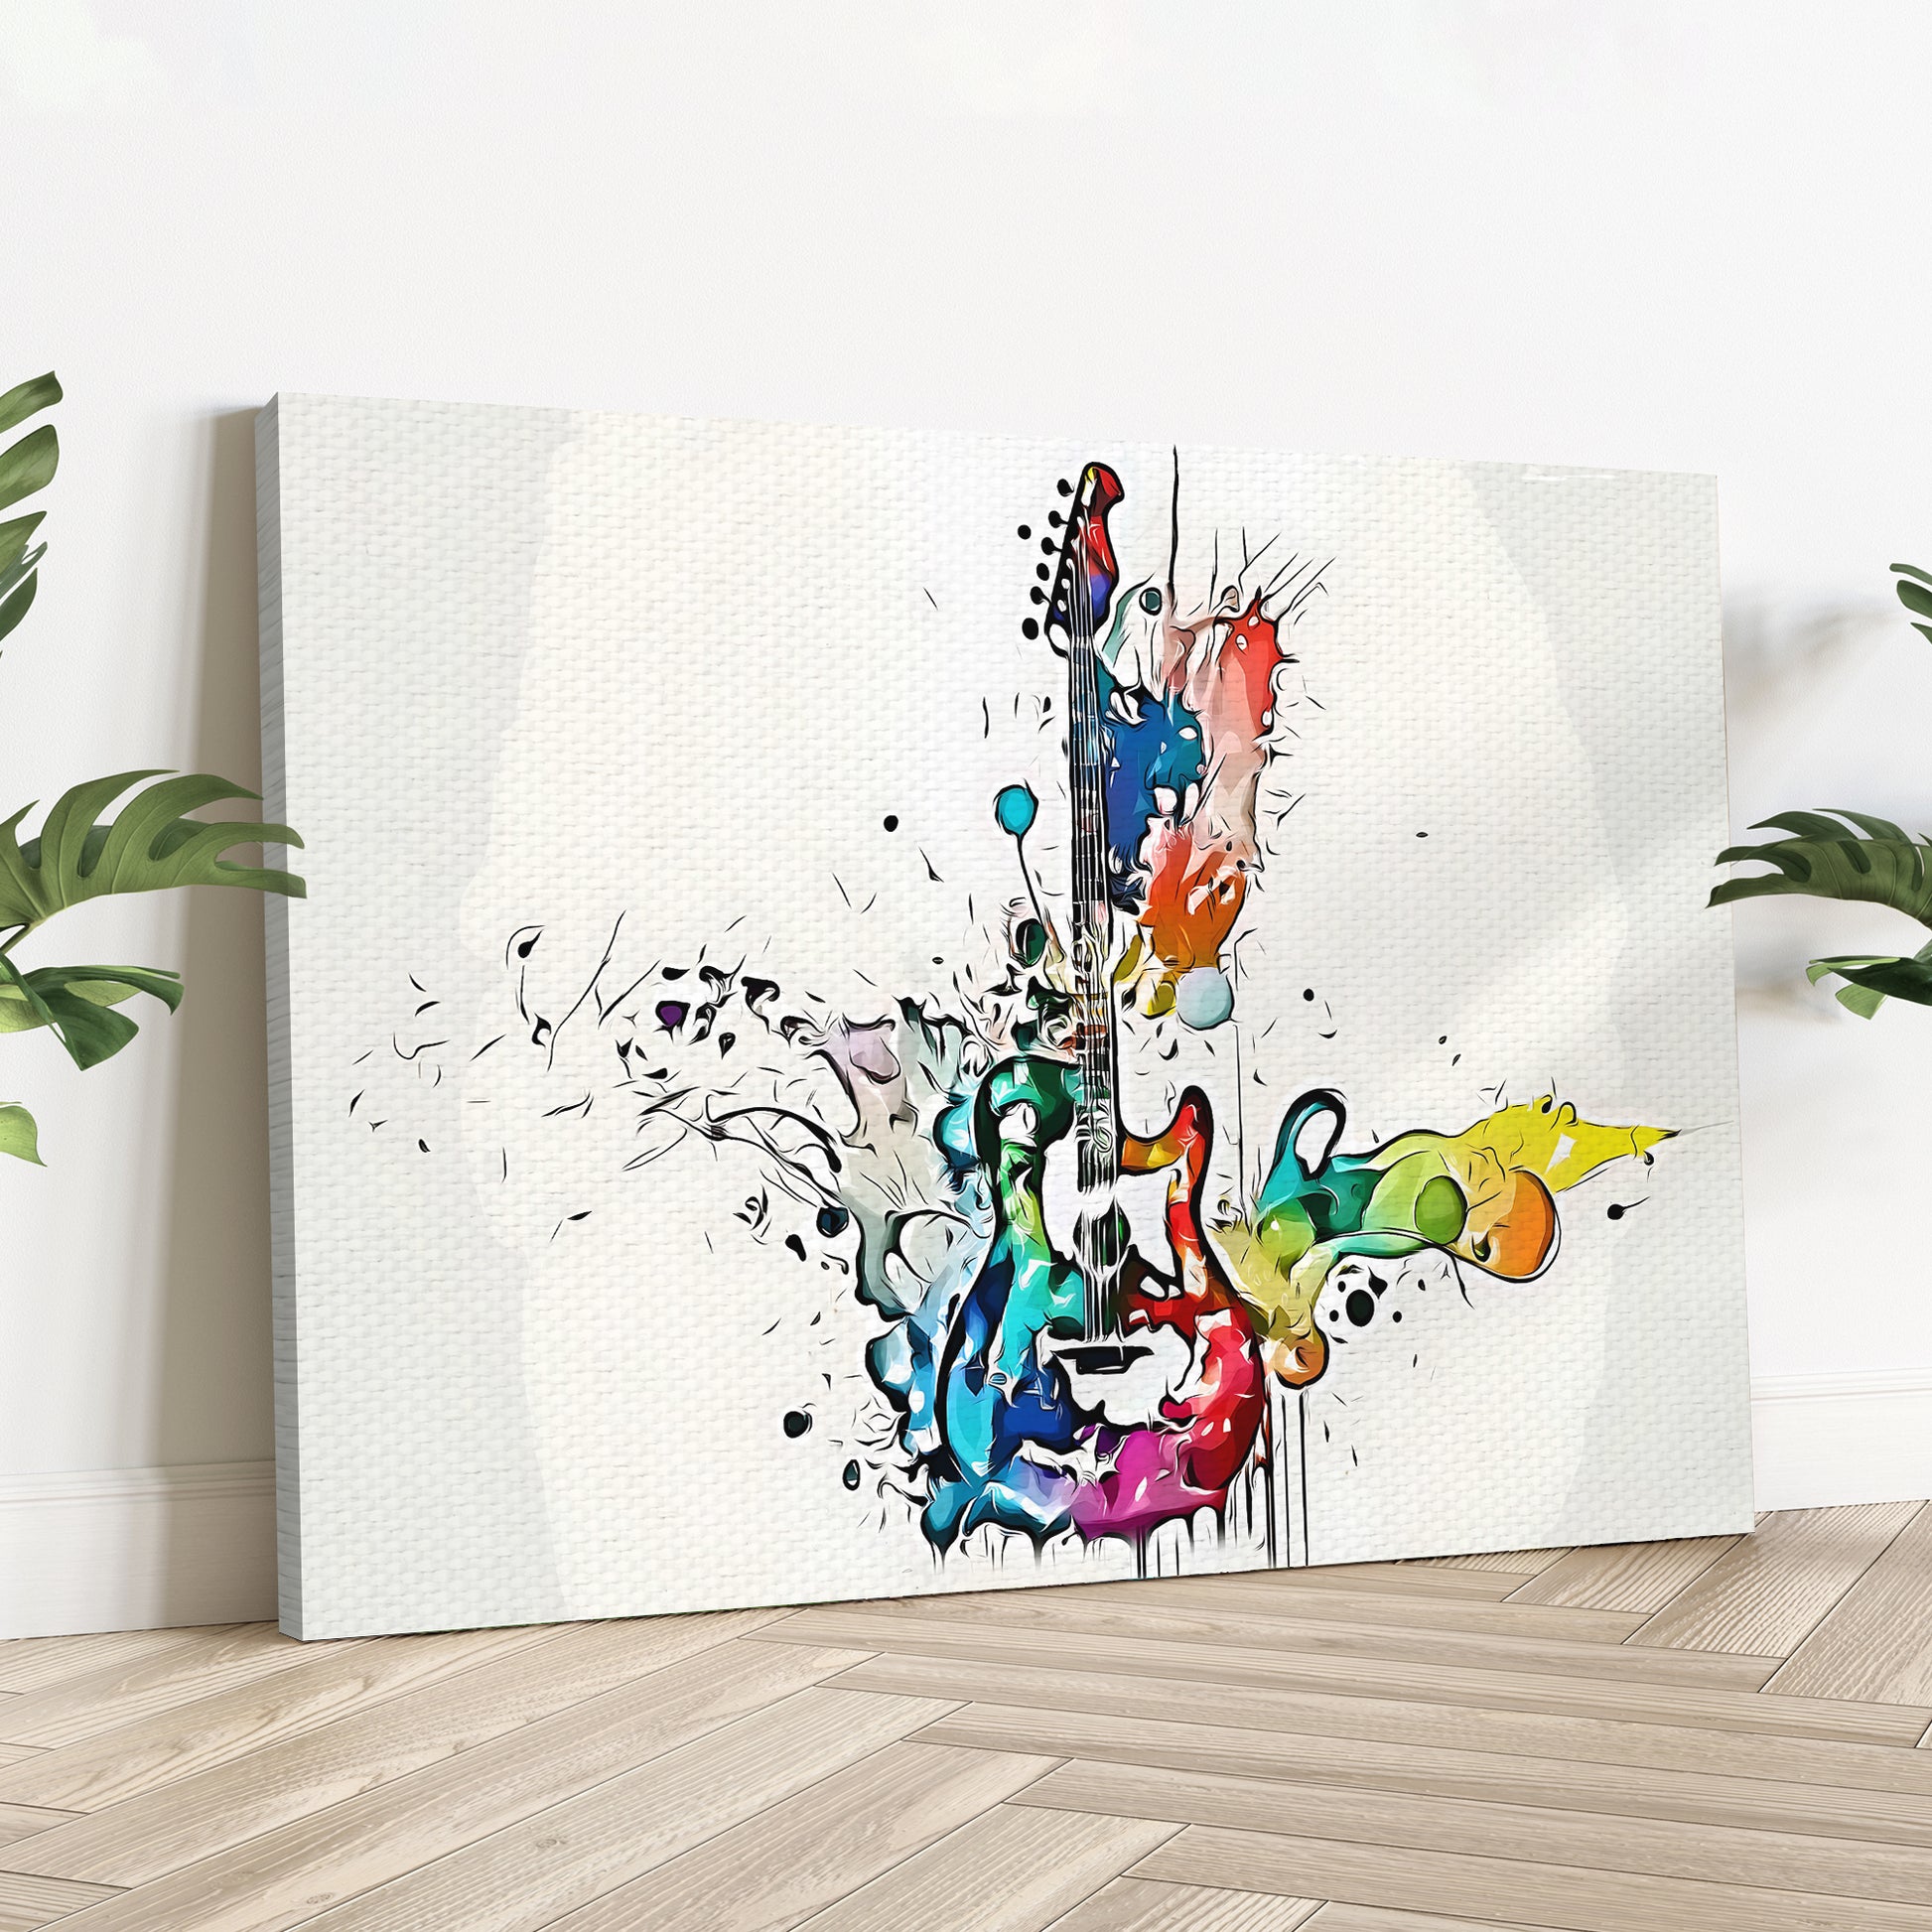 Guitar Abstract Canvas Wall Art - Image by Tailored Canvases